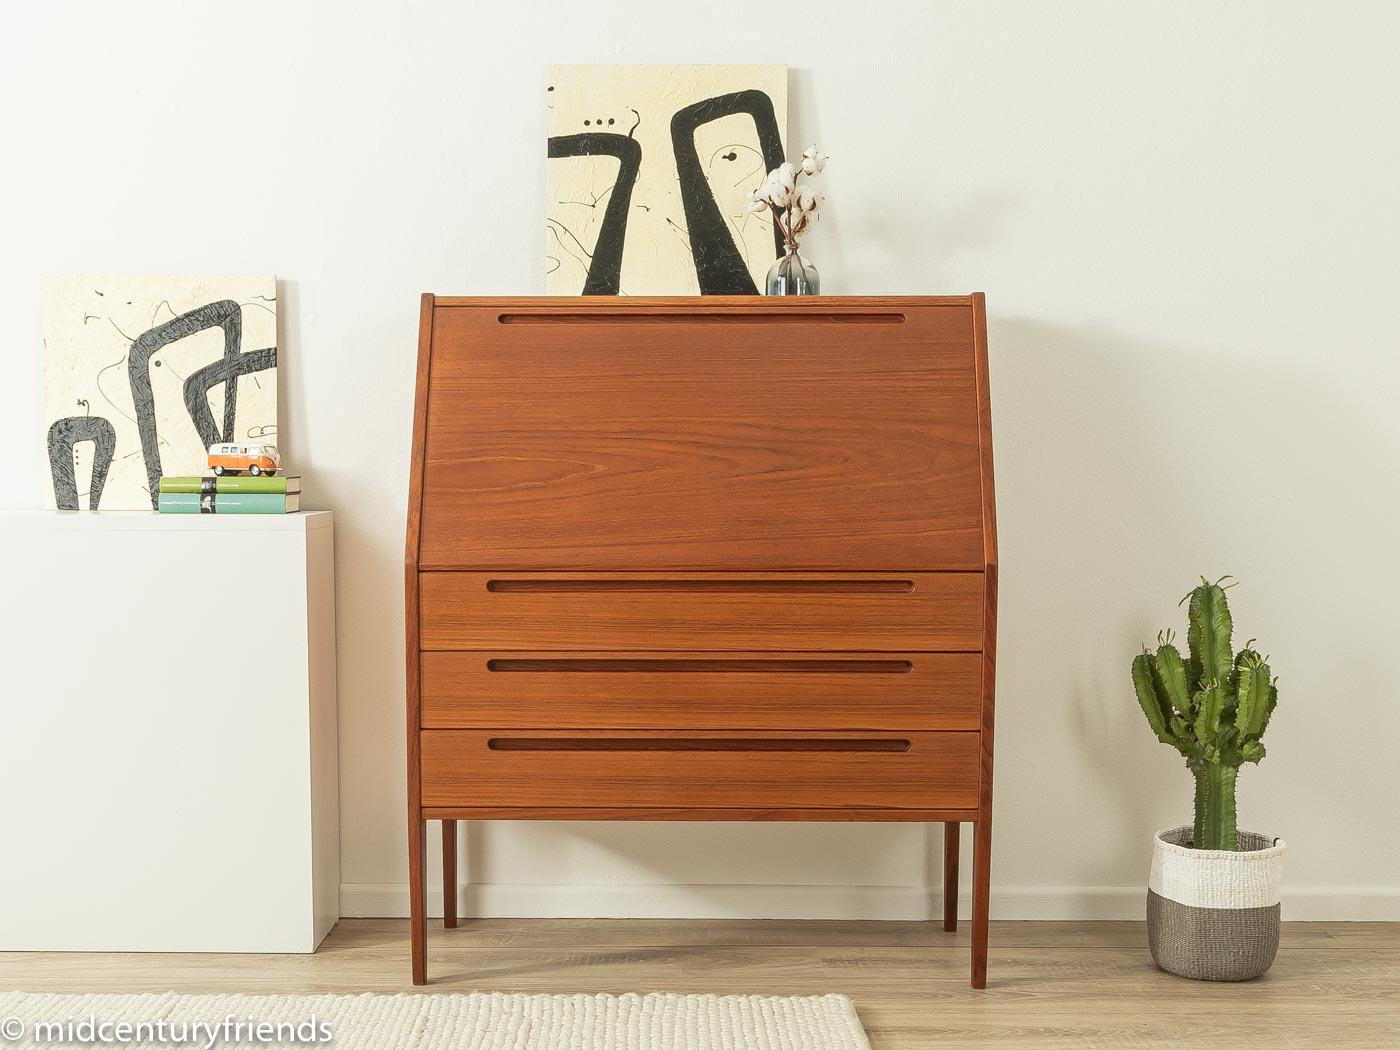 Rare bureau from the 1960s by Nils Jonsson for HJN Møbelfabrik. Corpus in teak veneer with a hinged work surface, three large and three small drawers, one of which has a mirror, two storage compartments and straight feet. The interior can be